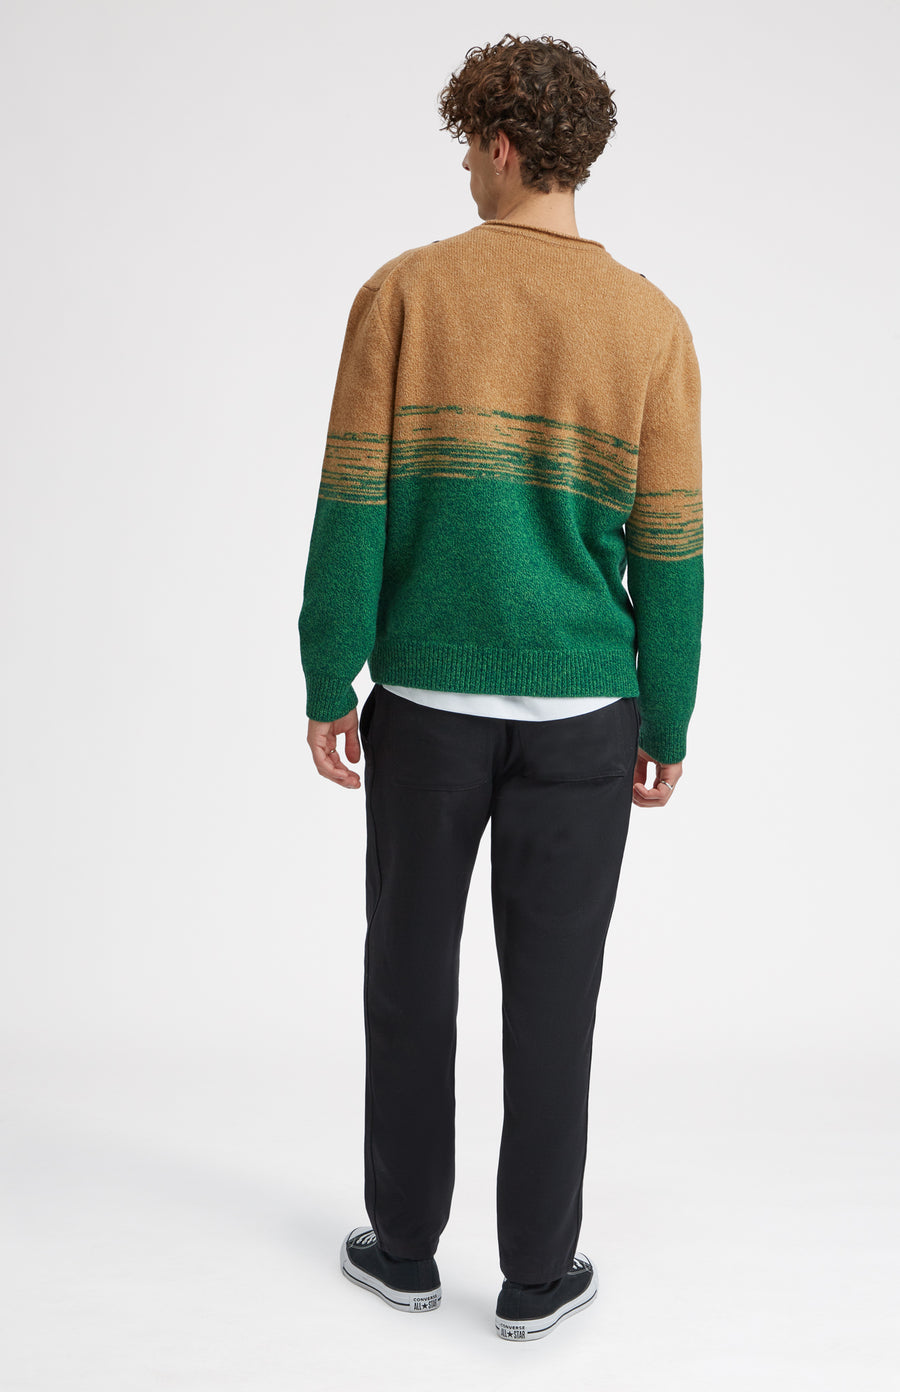 Lambswool Jumper with argyle in Vicuna & Evergreen rear view - Pringle of Scotland